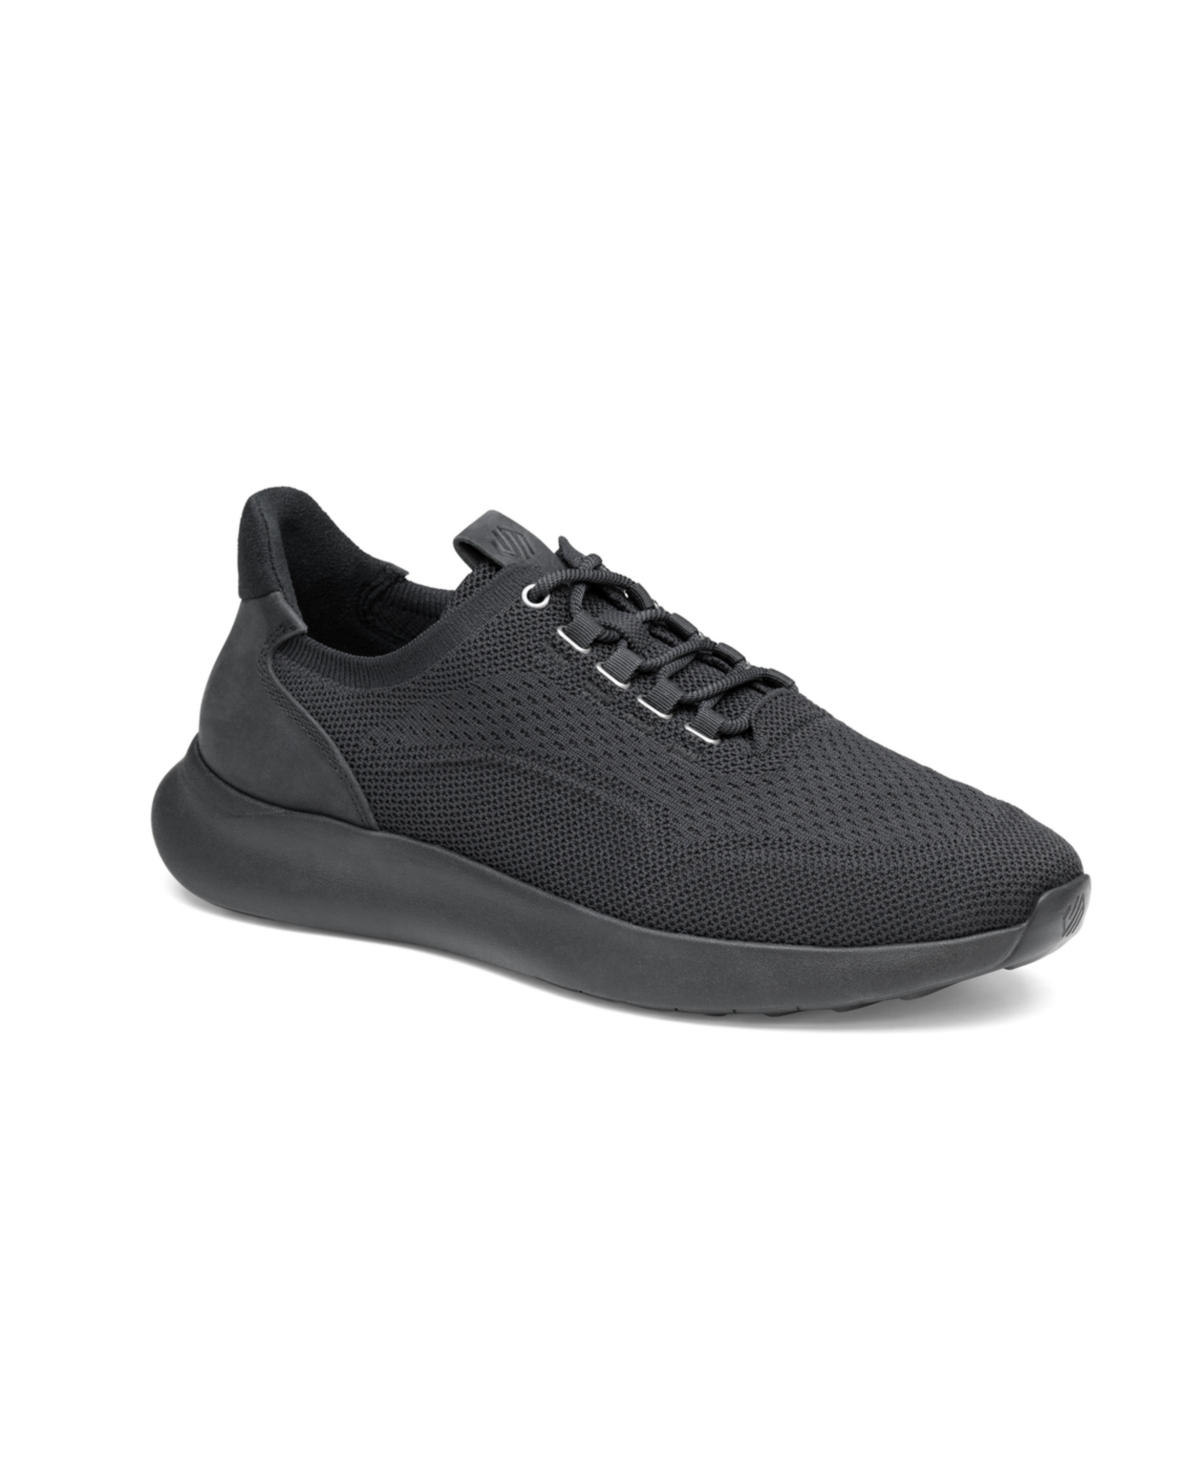 Johnston Murphy Amherst 2.0 Lace Up Sneakers - Black Knit